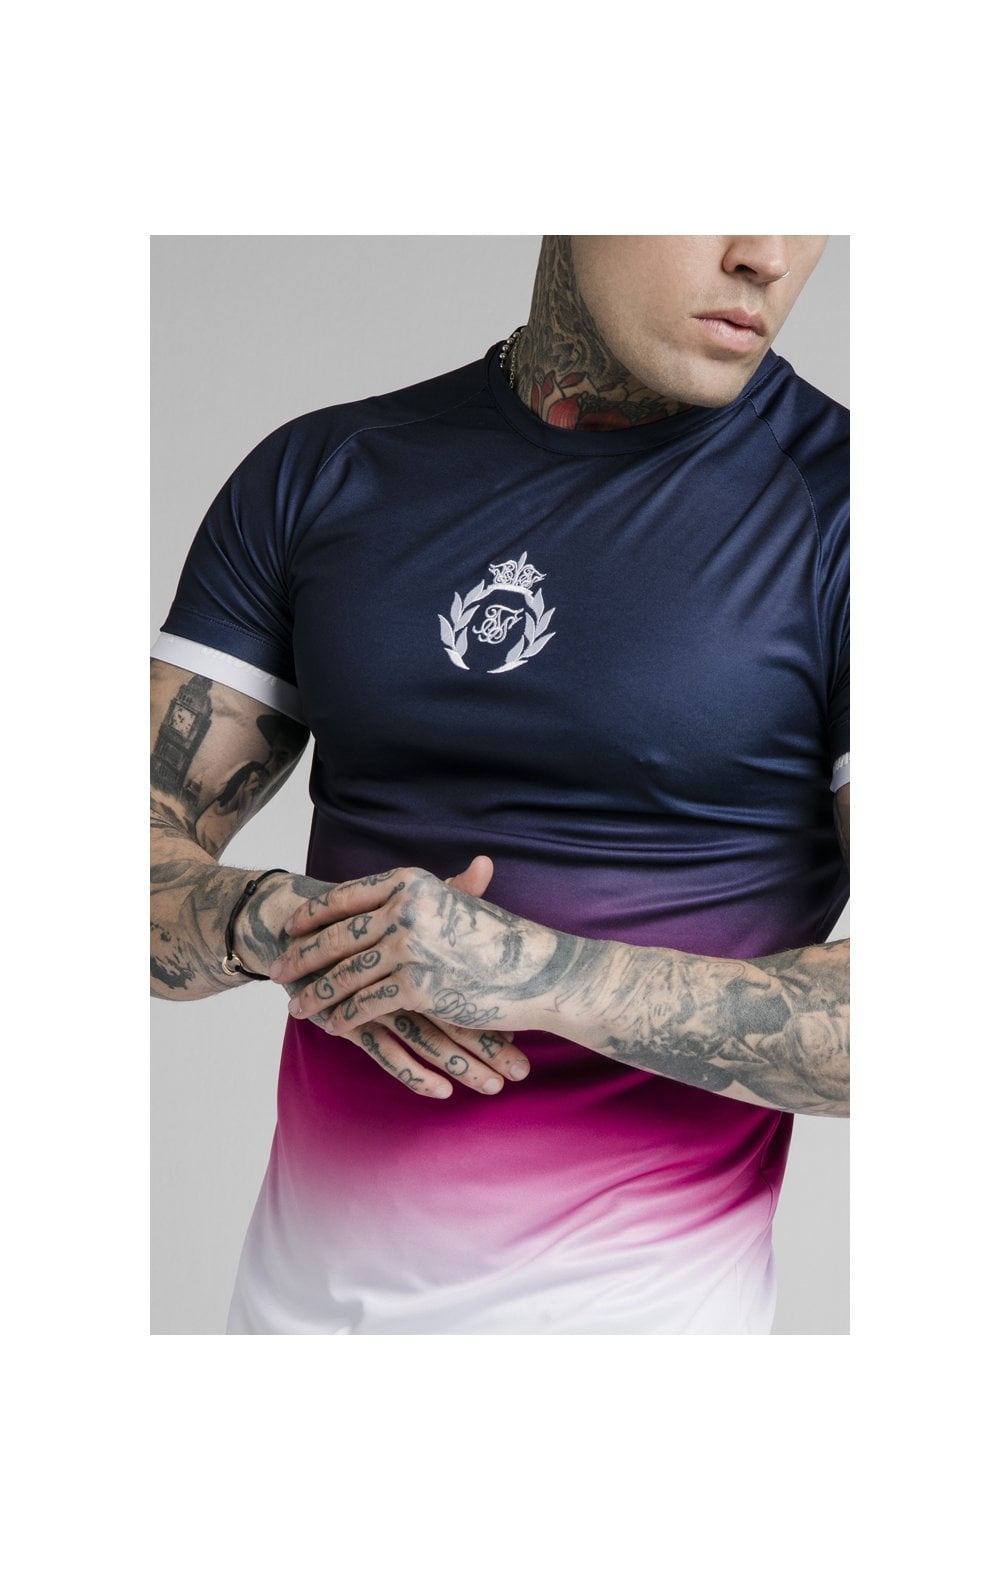 SikSilk S/S Inset Cuff Fade Tech Tee - Navy,Pink & White (1)